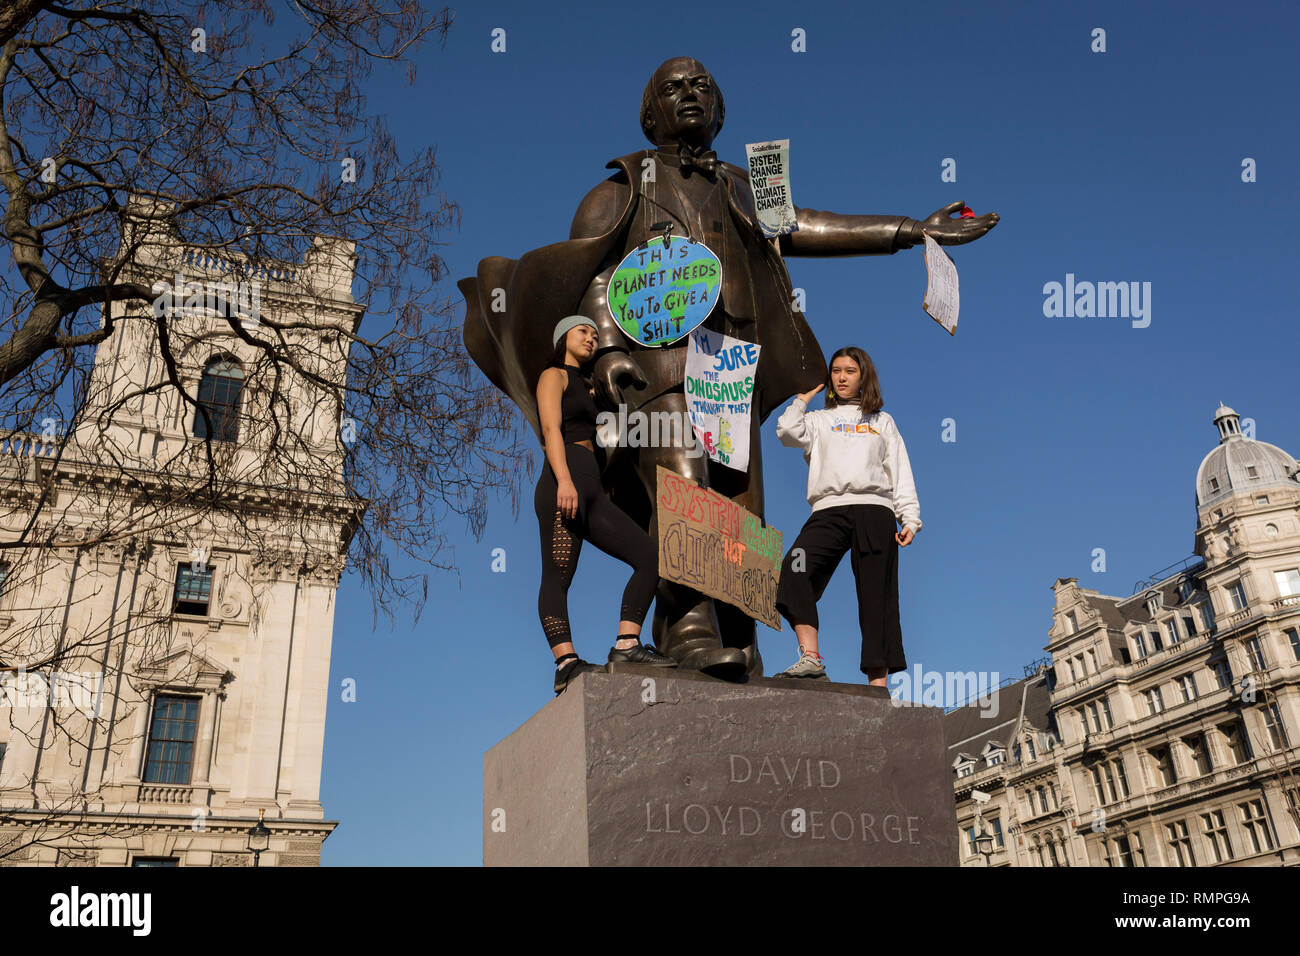 London, UK. 15th Feb, 2019.  Inspired by Swedish teenager Greta Thunberg and organised by Youth Strike 4 Climate, British eco-aware school and college-age pupils protest about Climate Change stand on the statue of Winston Churchill in Parliament Square during their walkout from classes, on 15th February 2019, in Westminster, London England. Photo by Richard Baker / Alamy Live News Credit: RichardBaker/Alamy Live News Stock Photo